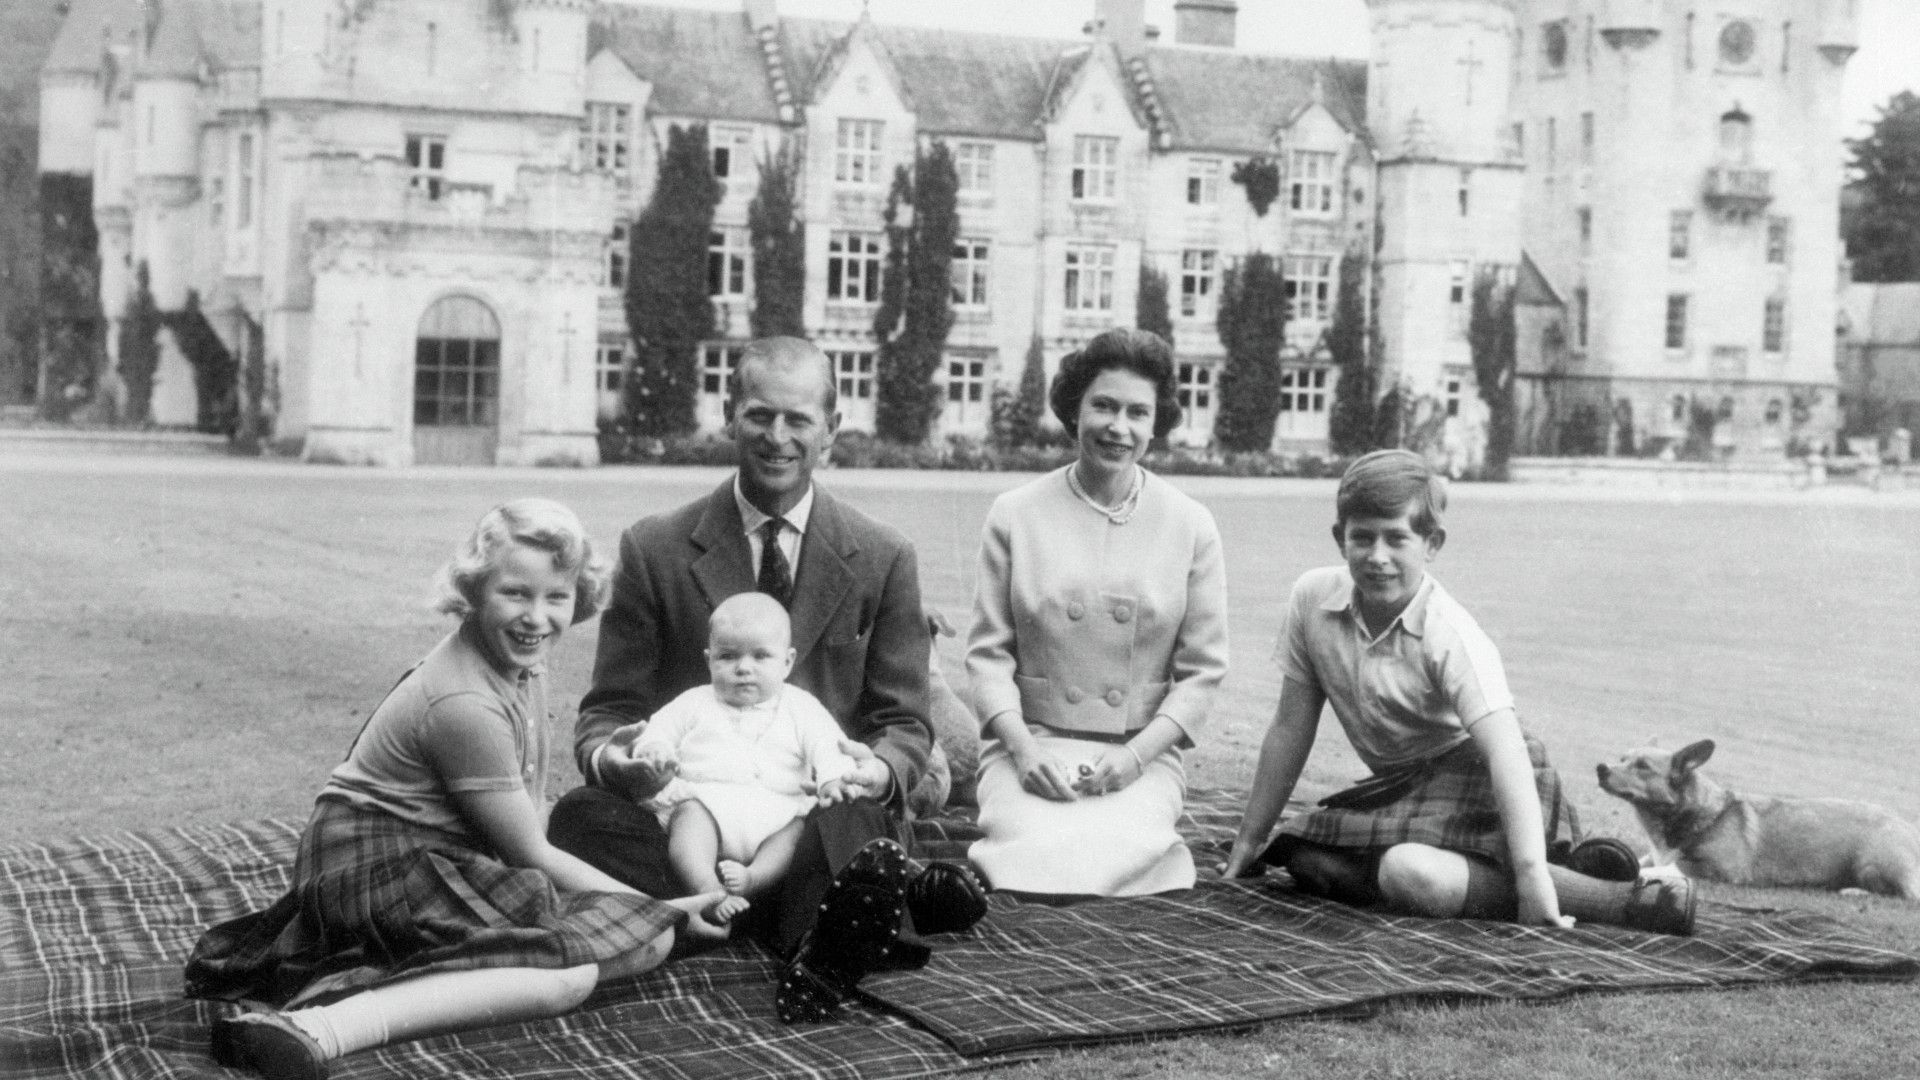 <p>                     The late Queen Elizabeth and Prince Philip famously had a love for the simpler things, being at their happiest when out and about at Balmoral and getting to be a regular family together.                   </p>                                      <p>                     In a sweet photo, the then family of five (Prince Edward wouldn't be born for another 12 years after this) posed in the grounds of Balmoral with huge grins - and joined by some of their family pets.                   </p>